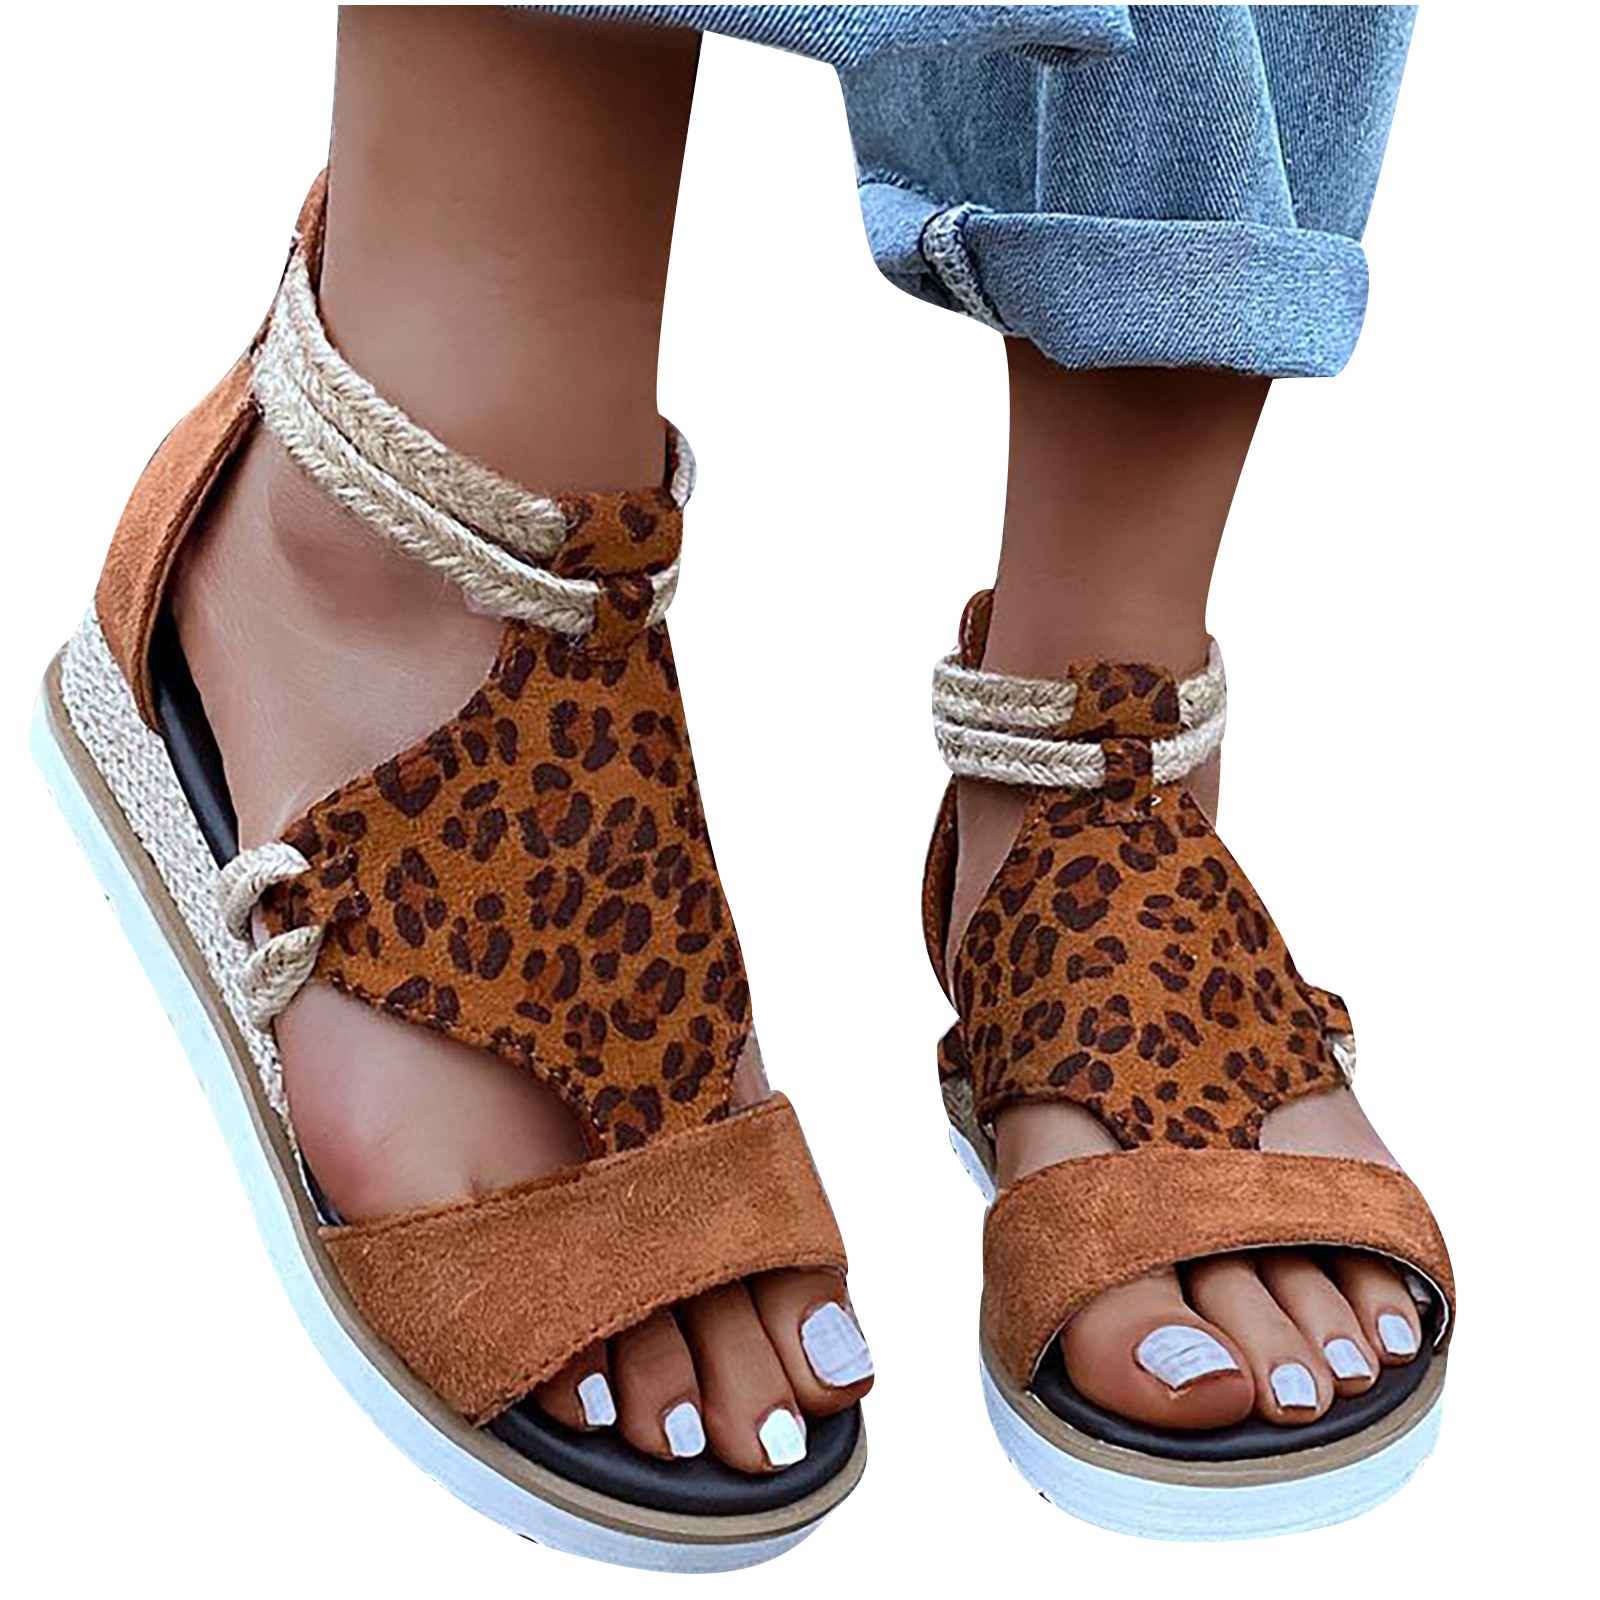 Mchoice Woman Summer Sandals Open Toe Casual Platform Wedge Shoes Casual Canvas Shoes on Clearance - image 1 of 5